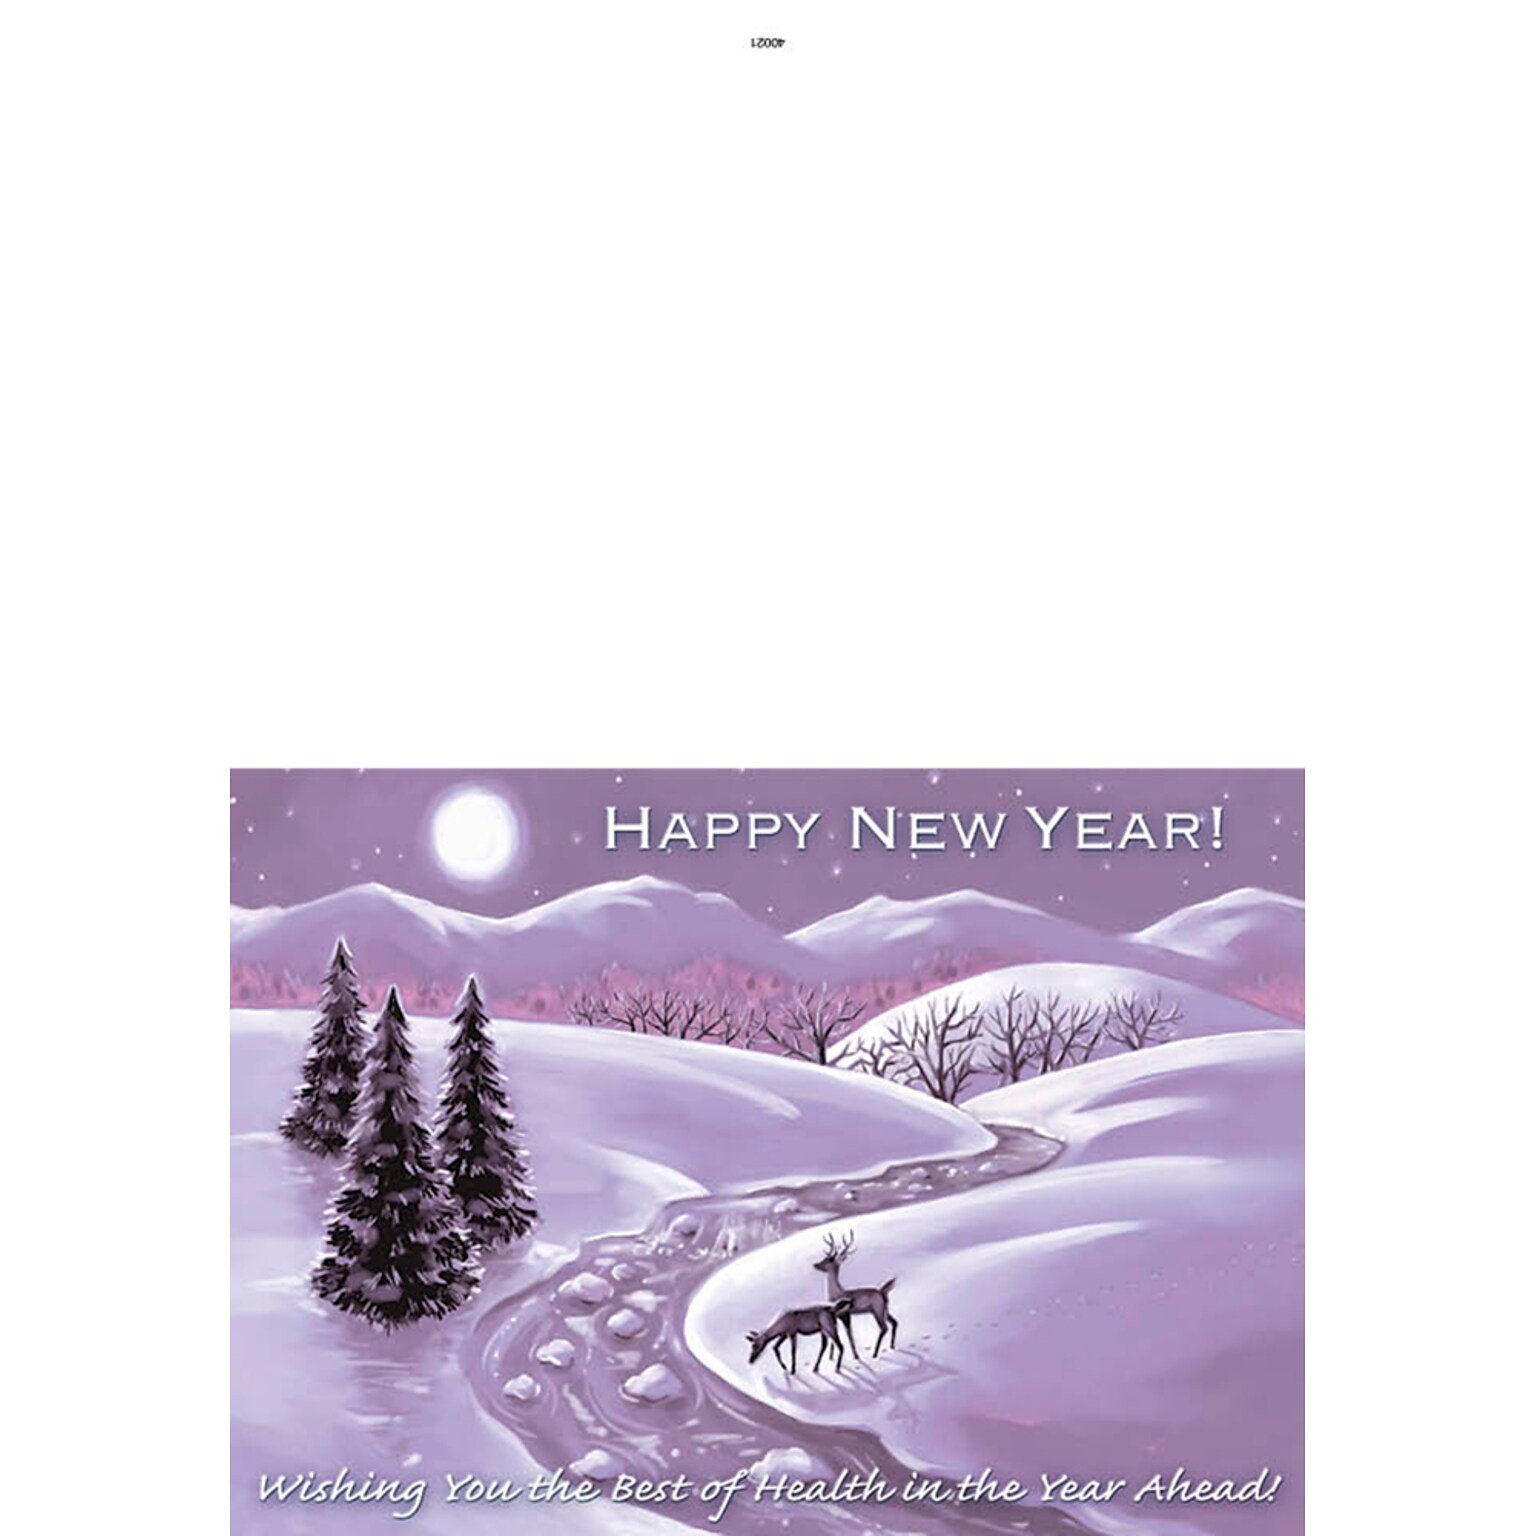 Happy New Year - wishing you the best of health in the new year -7 x 10 scored for folding to 7 x 5, 25 cards w/A7 env per set